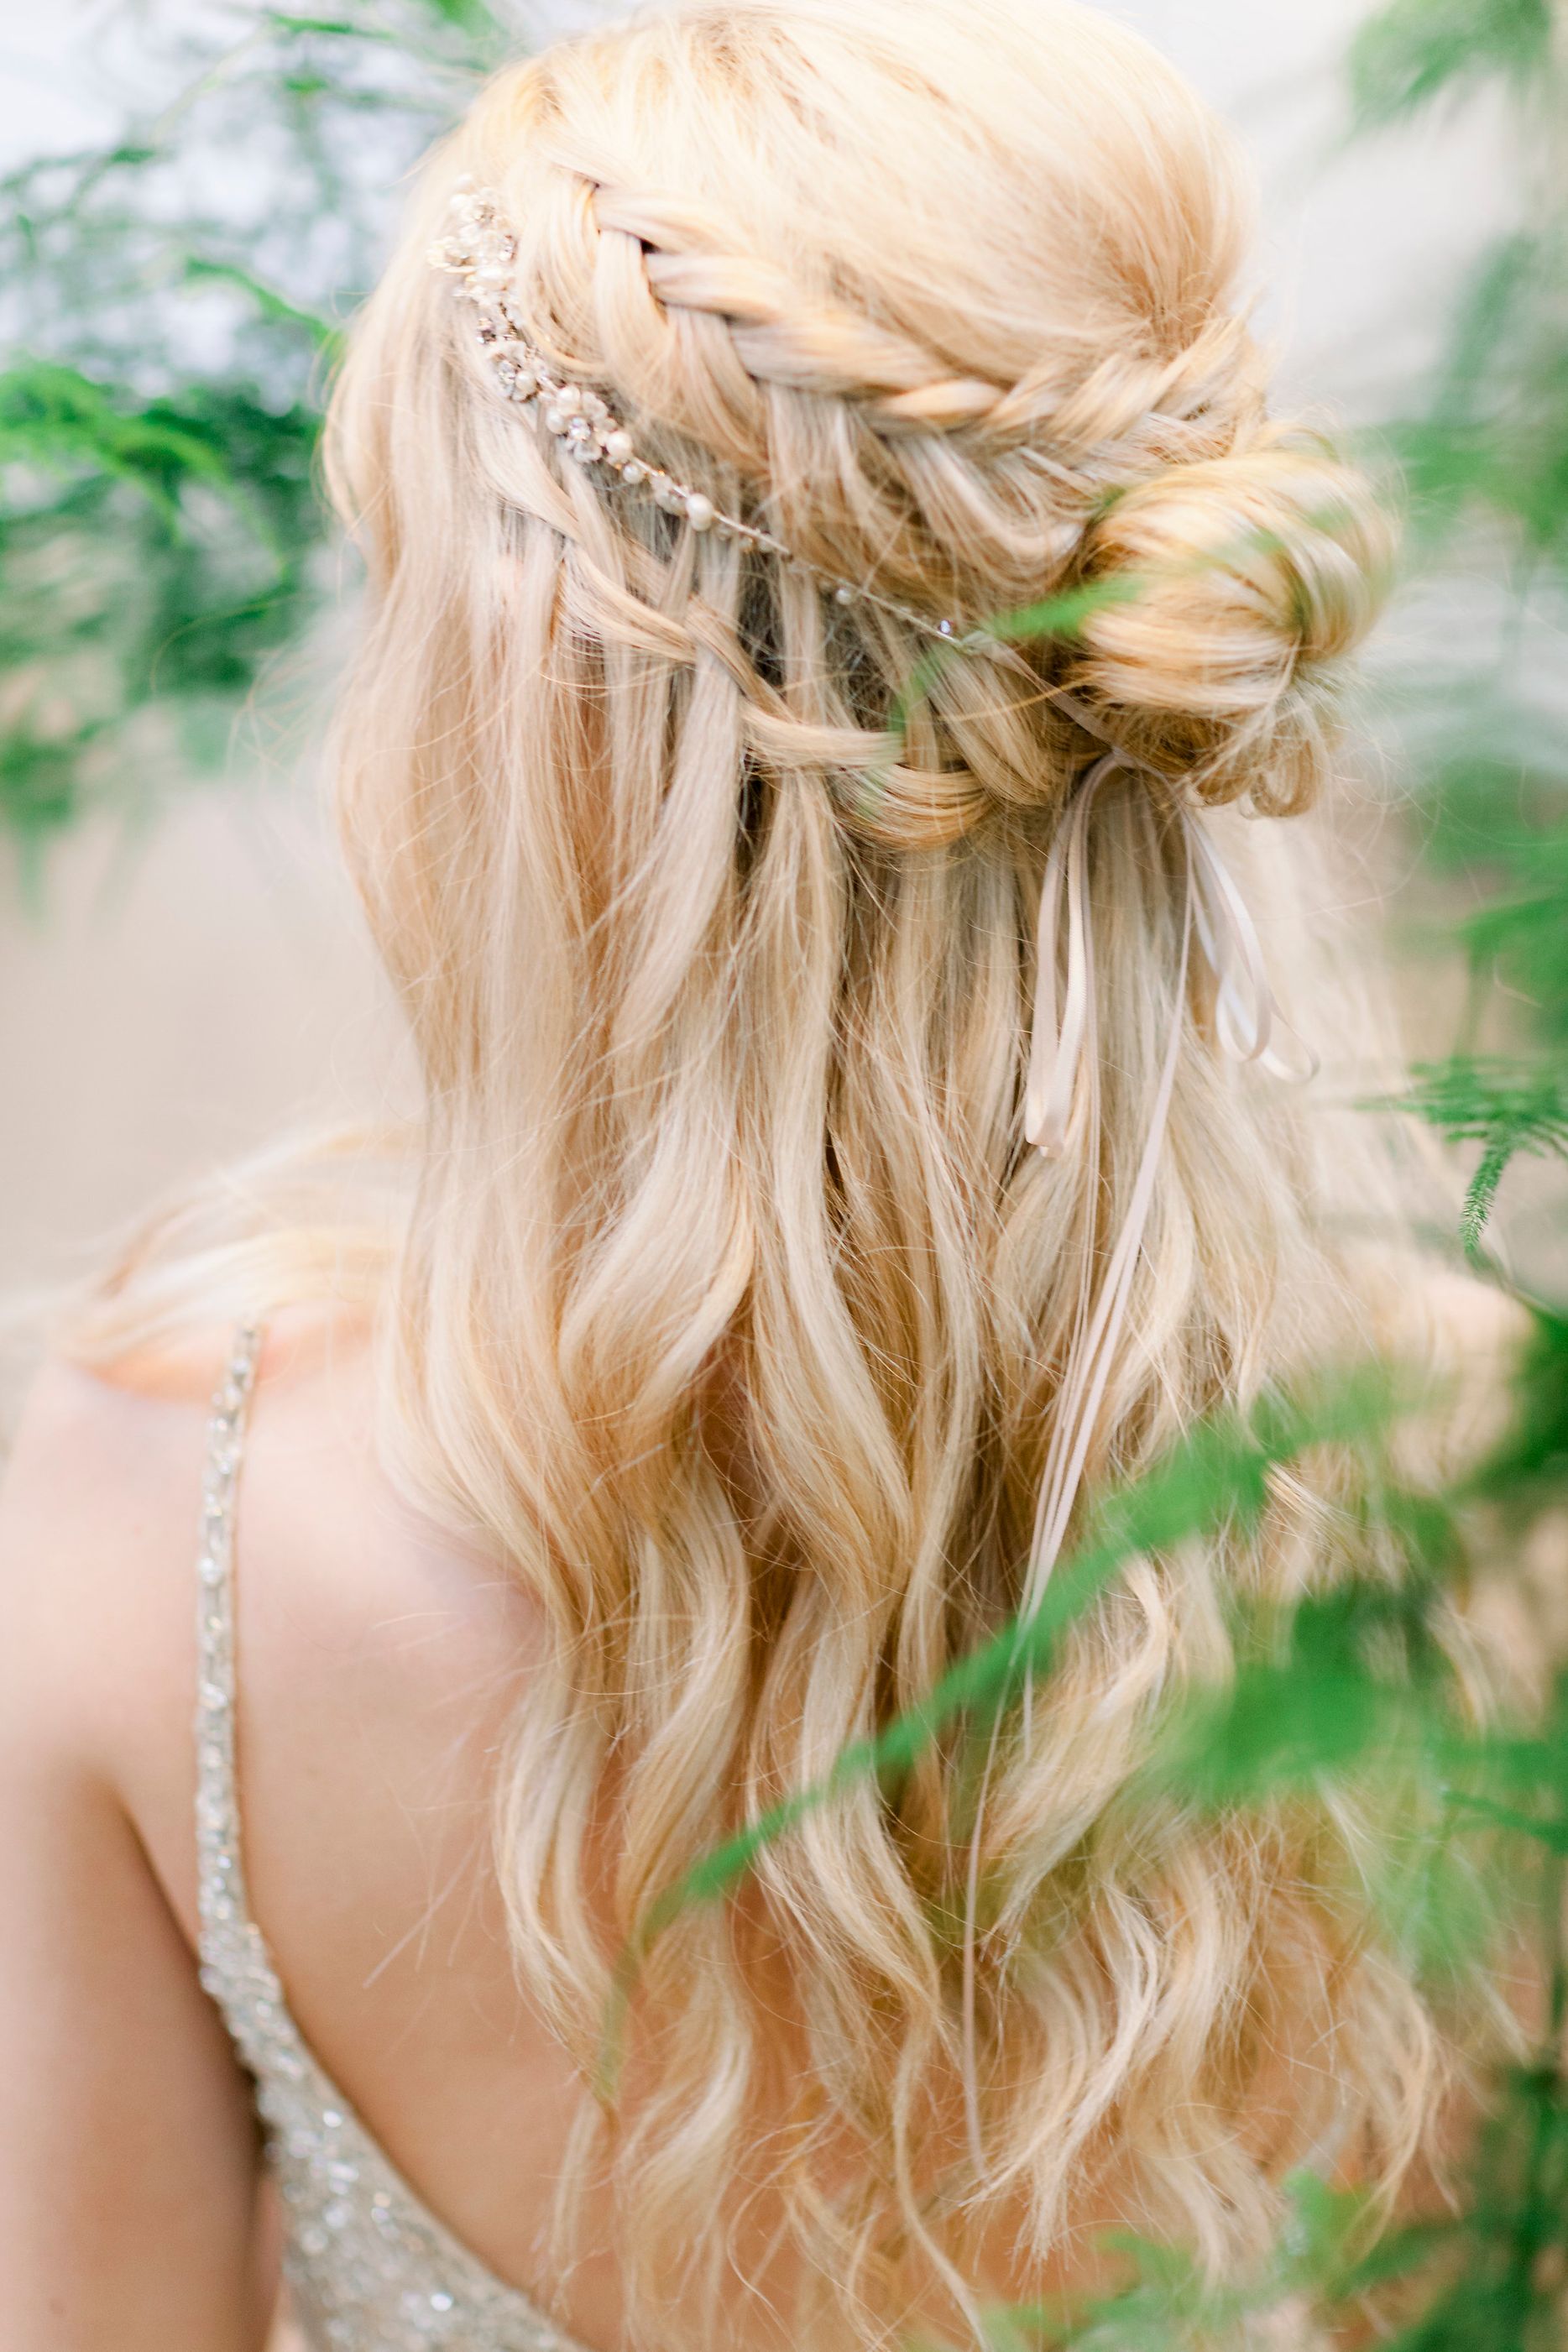 wildflower hair company blonde boho braided half up half down hairstyle with delicate hair vine